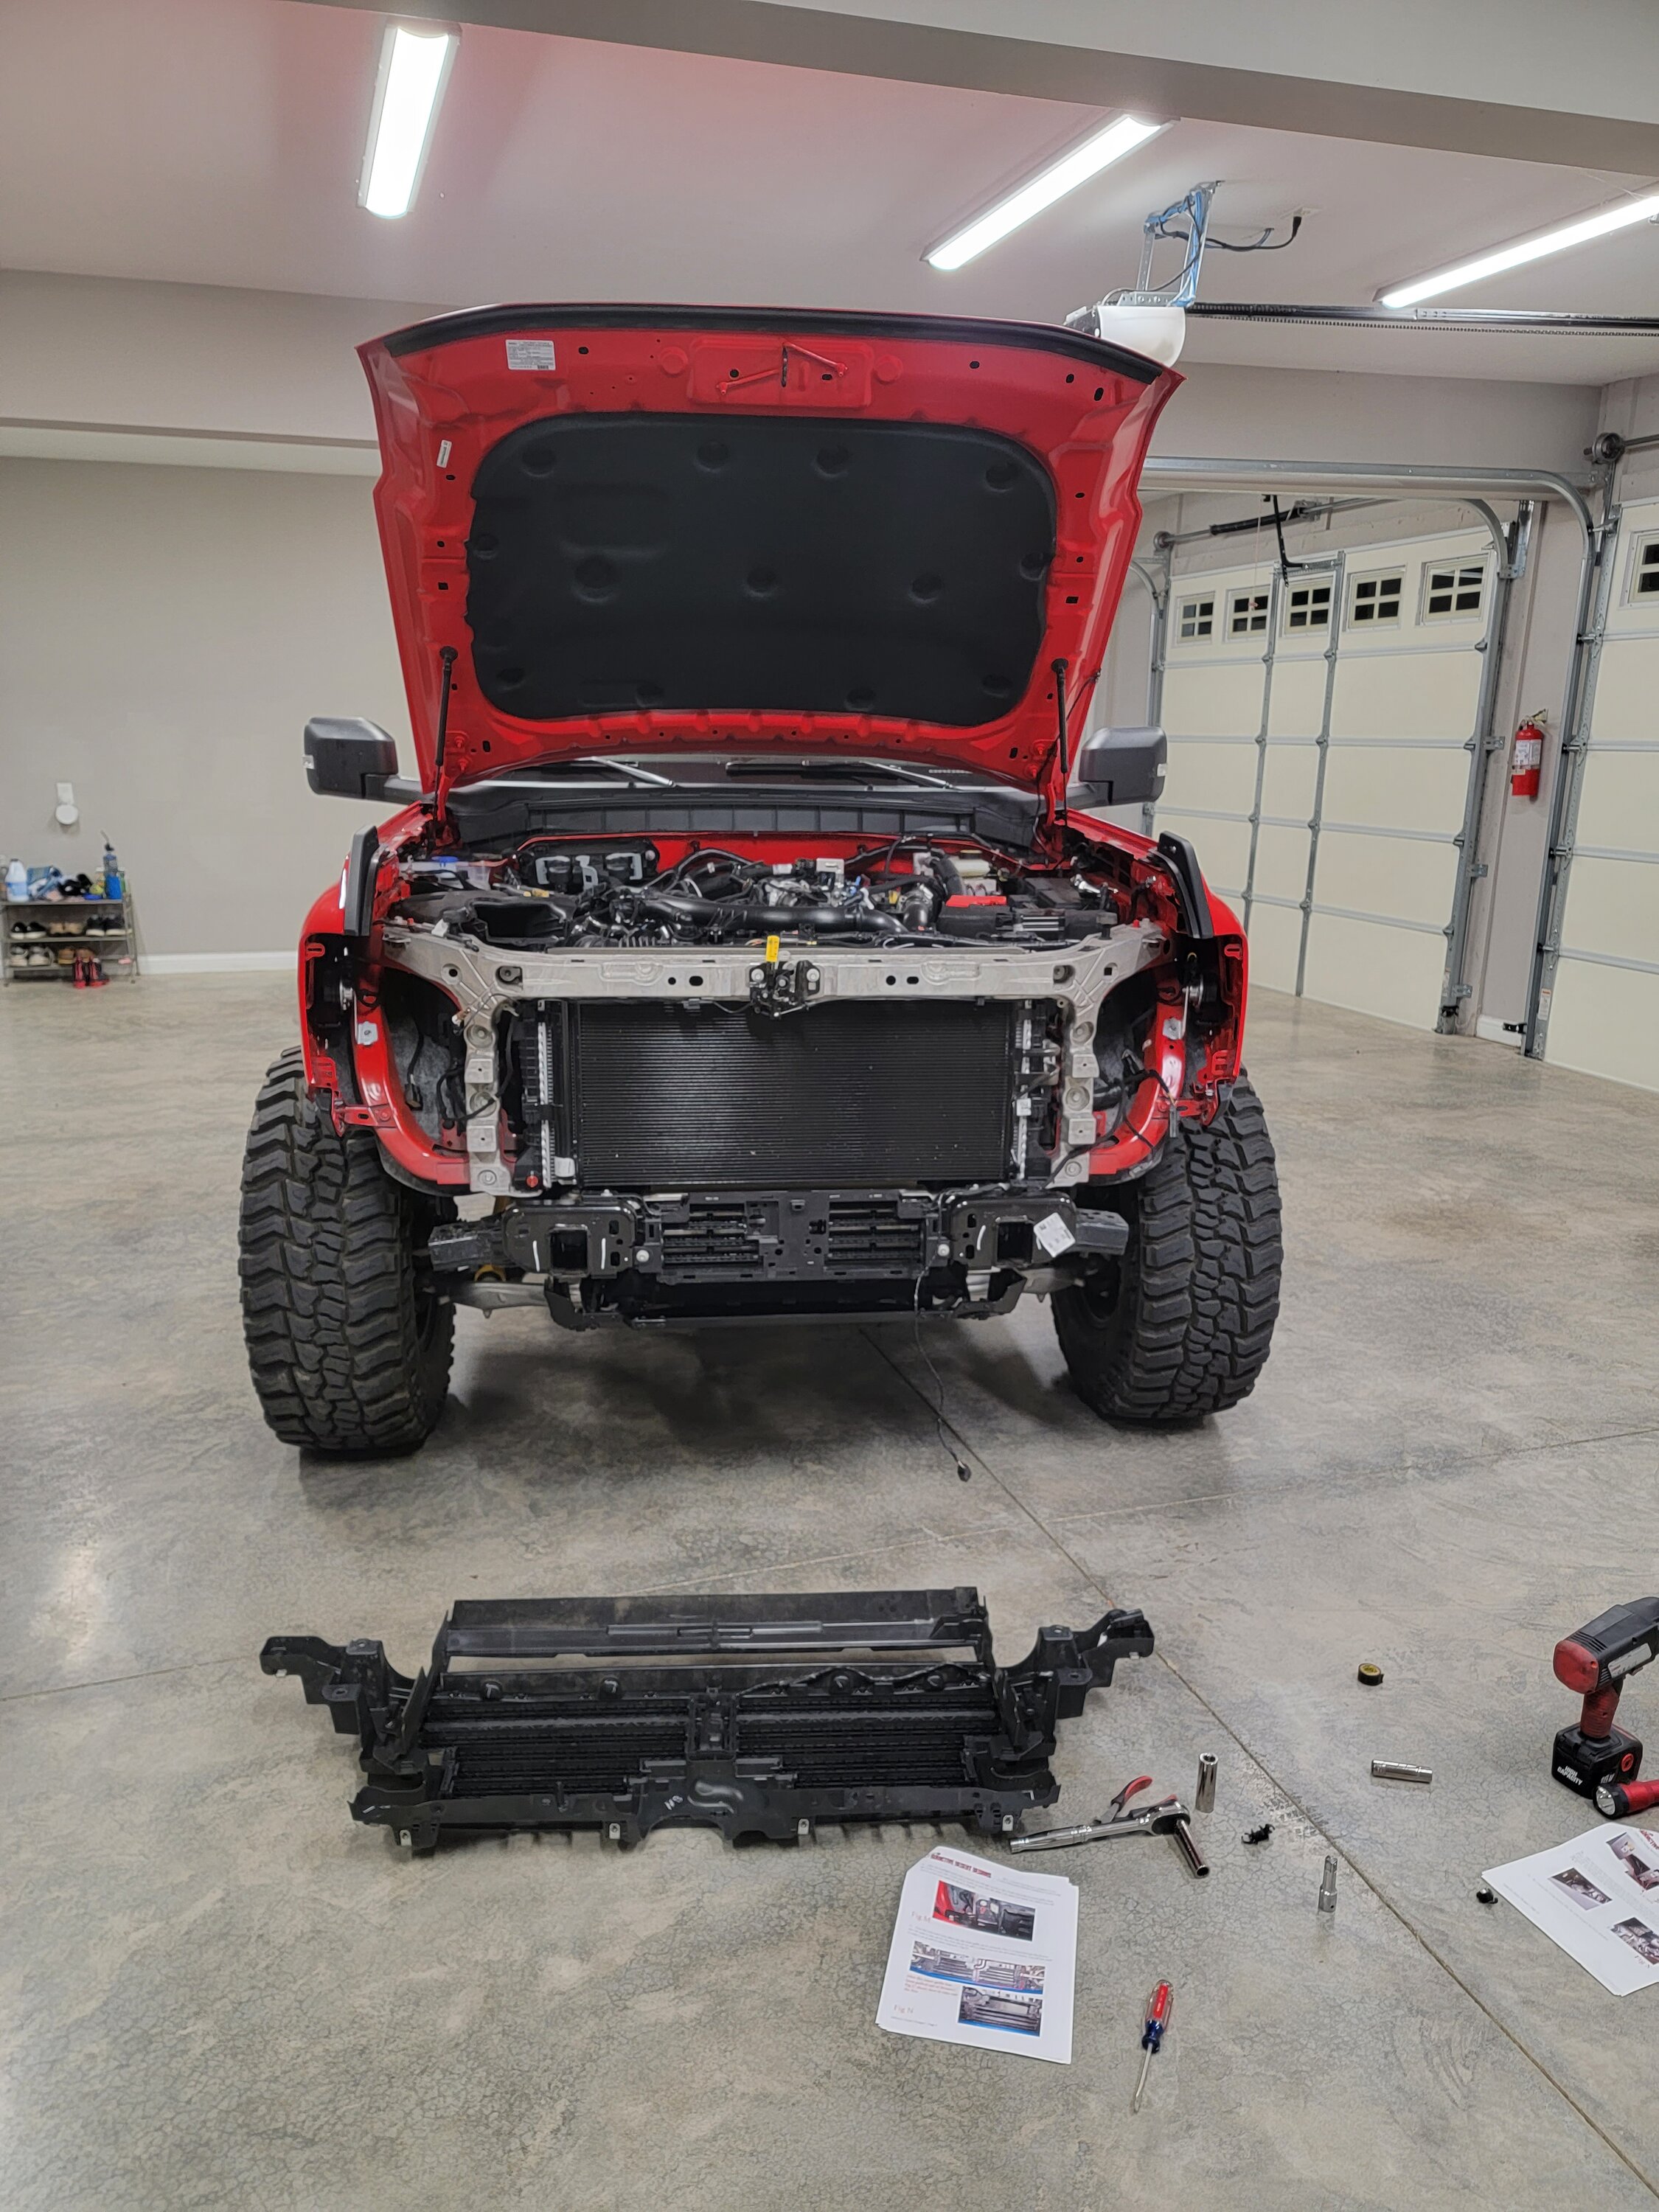 Ford Bronco Race Red Wildtrak Build in KY 20220611_005425